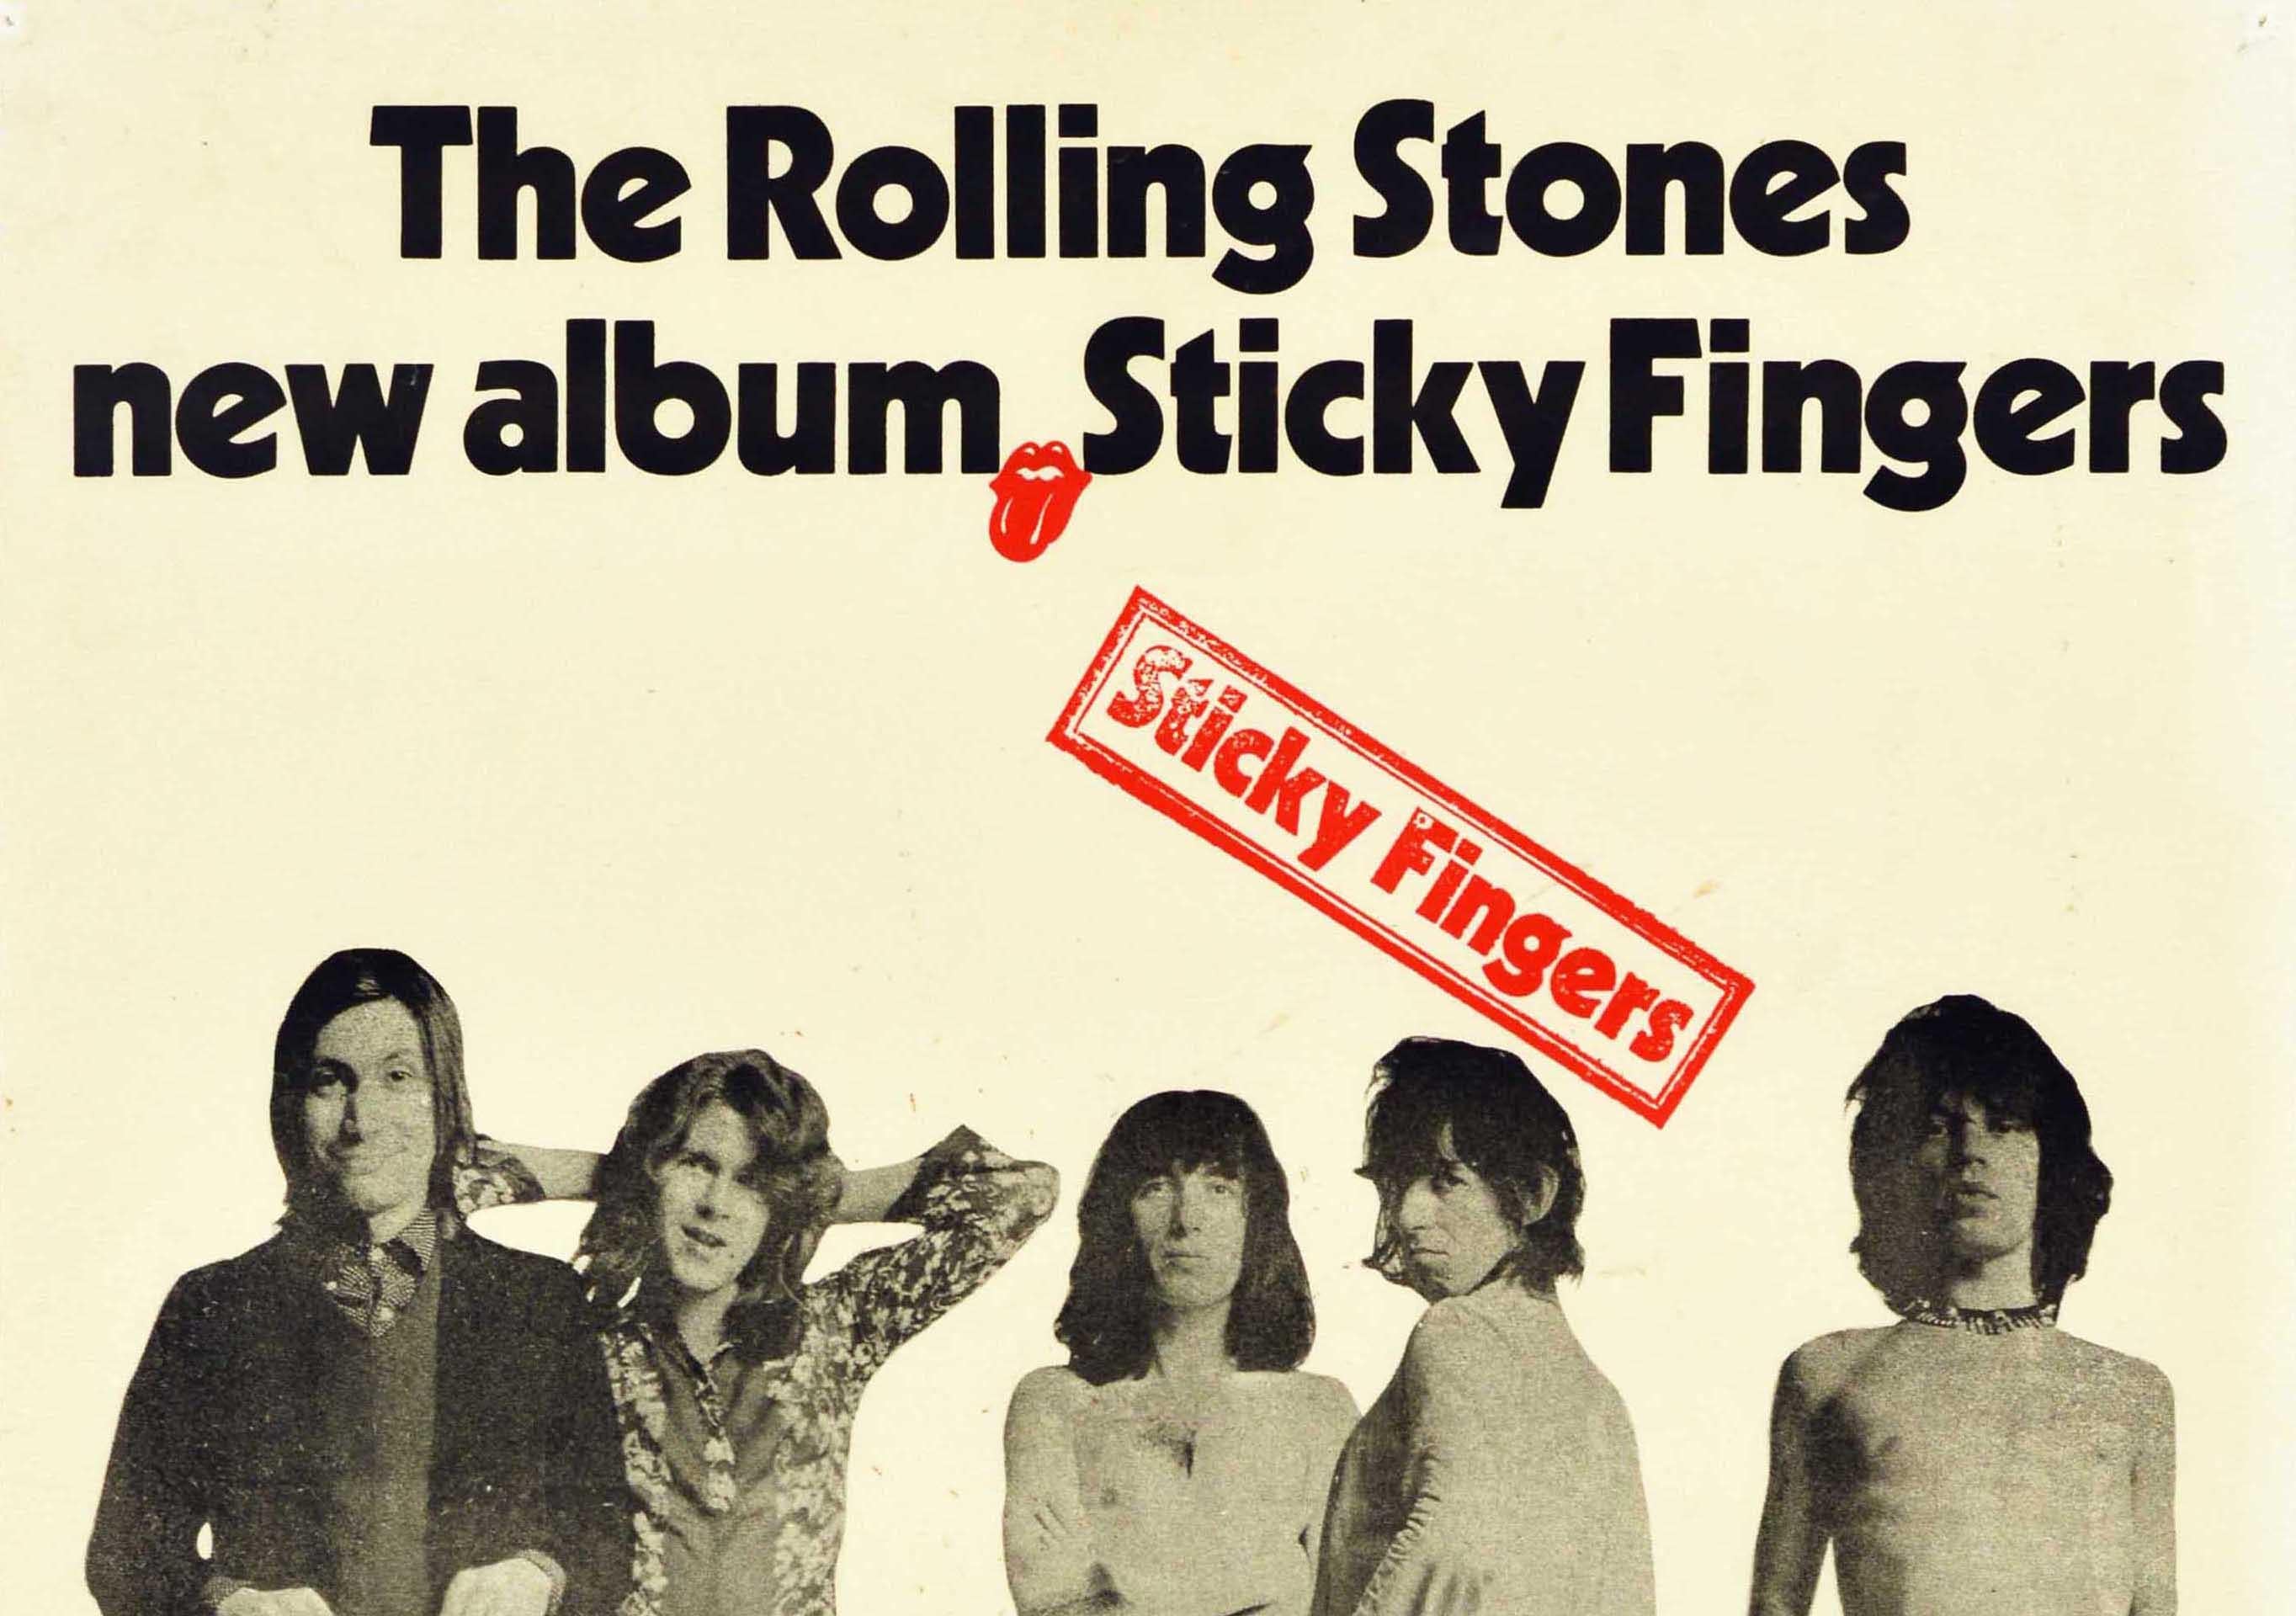 Original vintage music advertising poster for the release of The Rolling Stones new album Sticky Fingers featuring a black and white photograph of the partly dressed band members Charlie Watts, Mick Taylor, Bill Wyman, Keith Richards and Mick Jagger